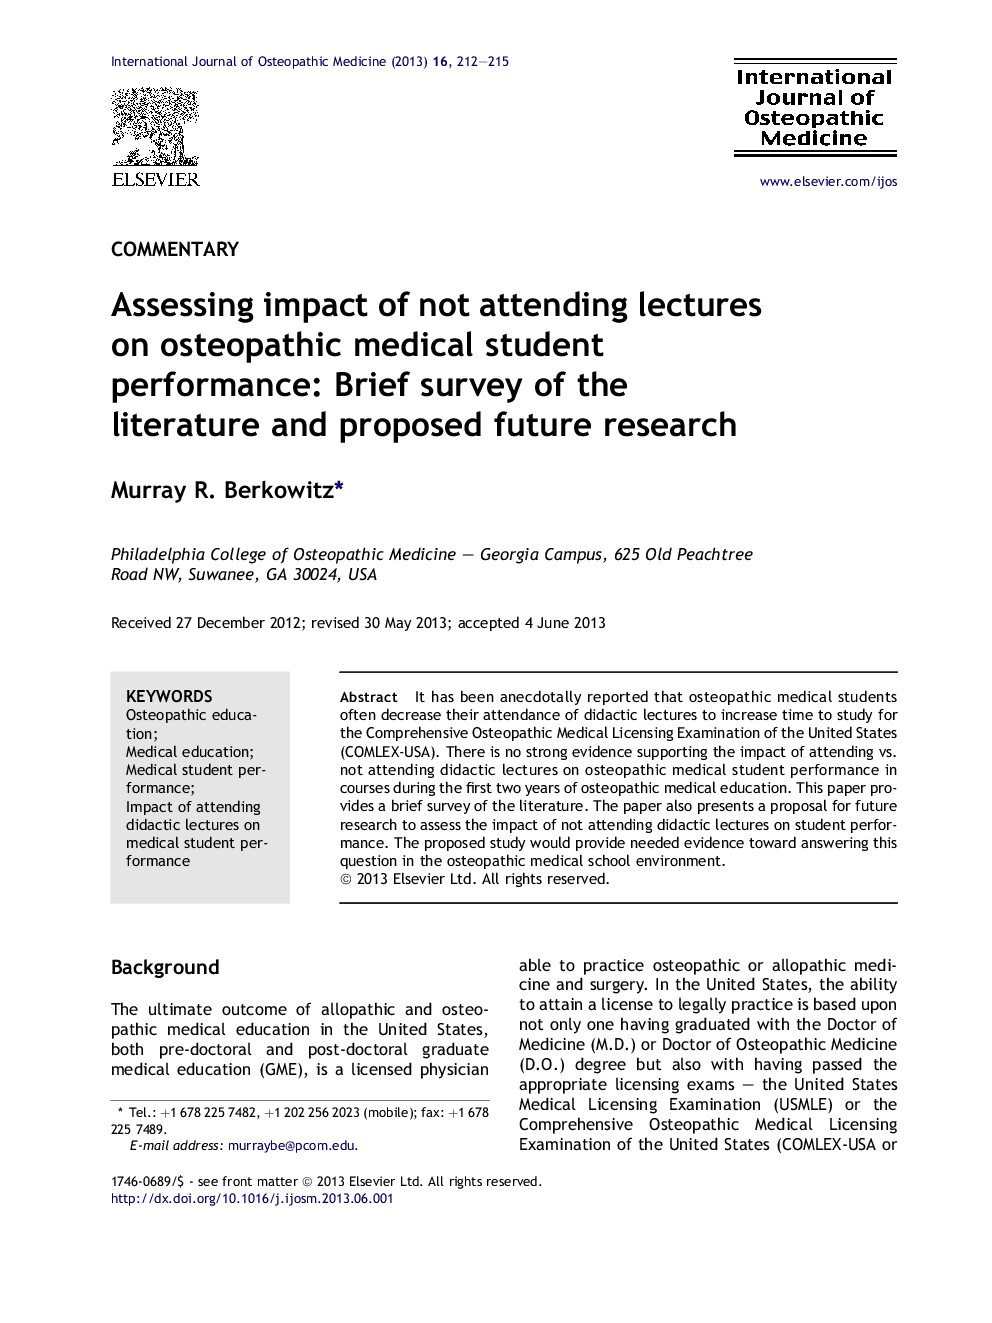 Assessing impact of not attending lectures on osteopathic medical student performance: Brief survey of the literature and proposed future research